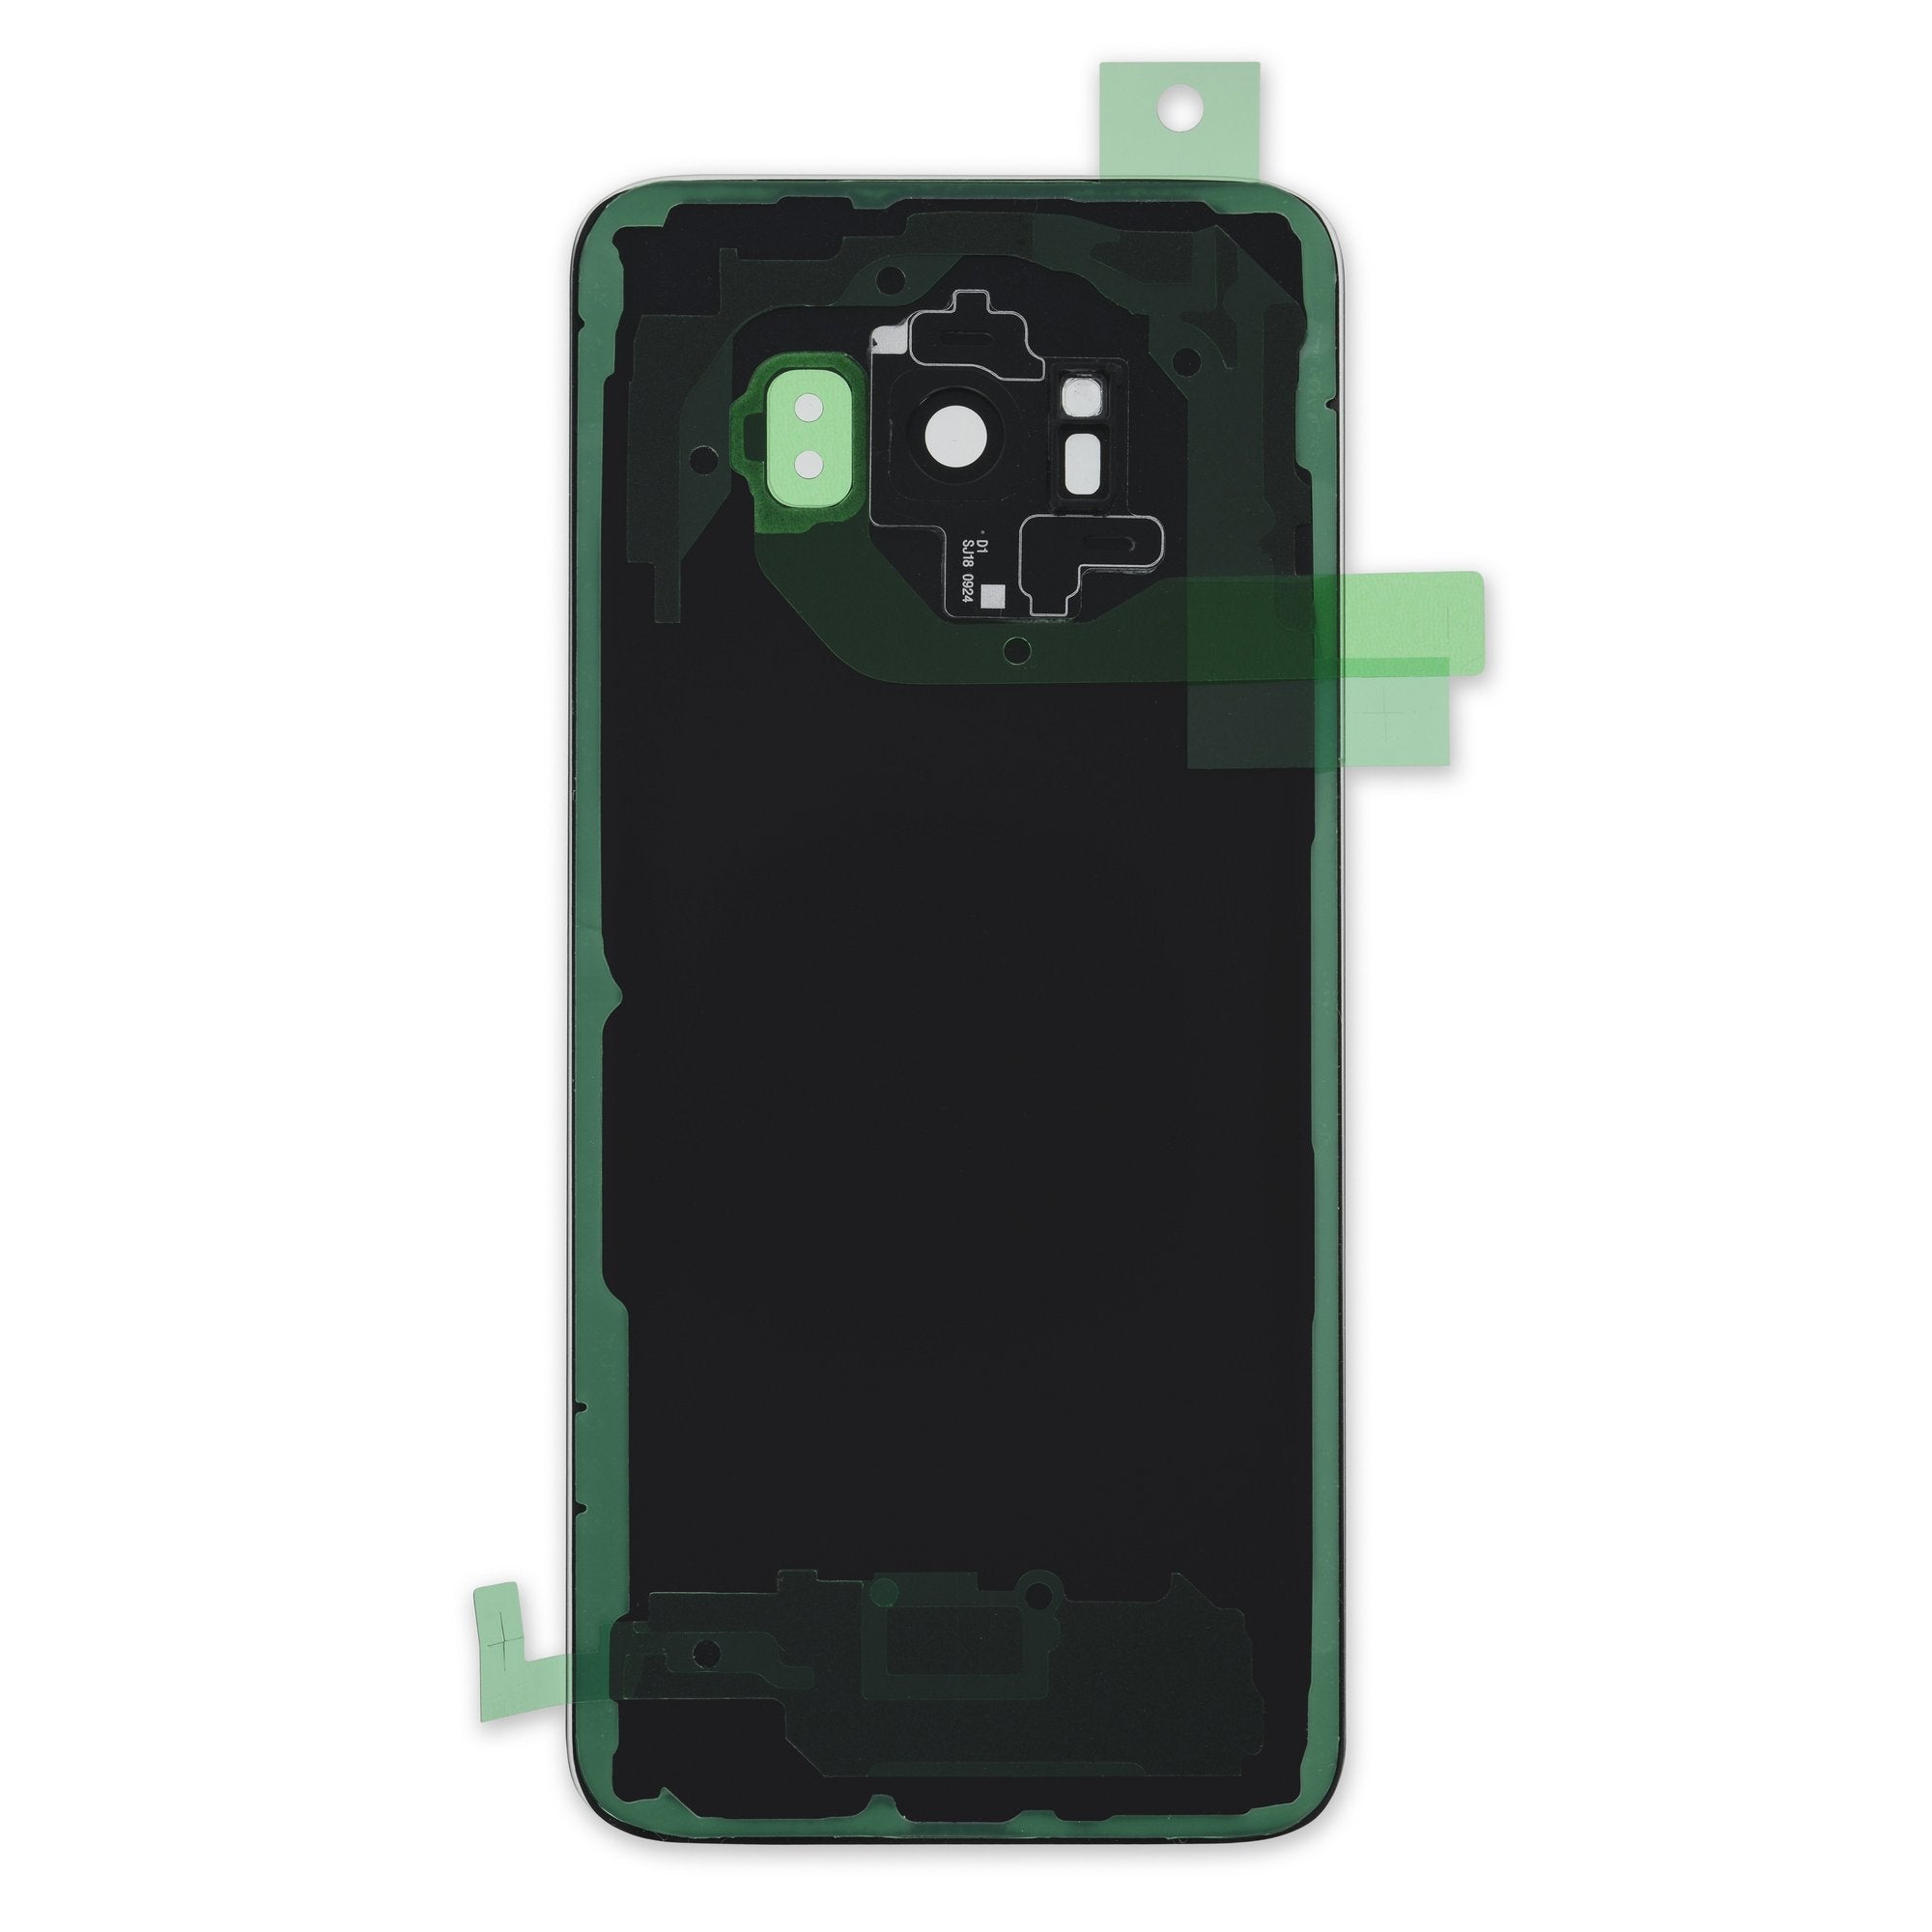 Galaxy S8 Rear Glass Panel/Cover Black New Part Only